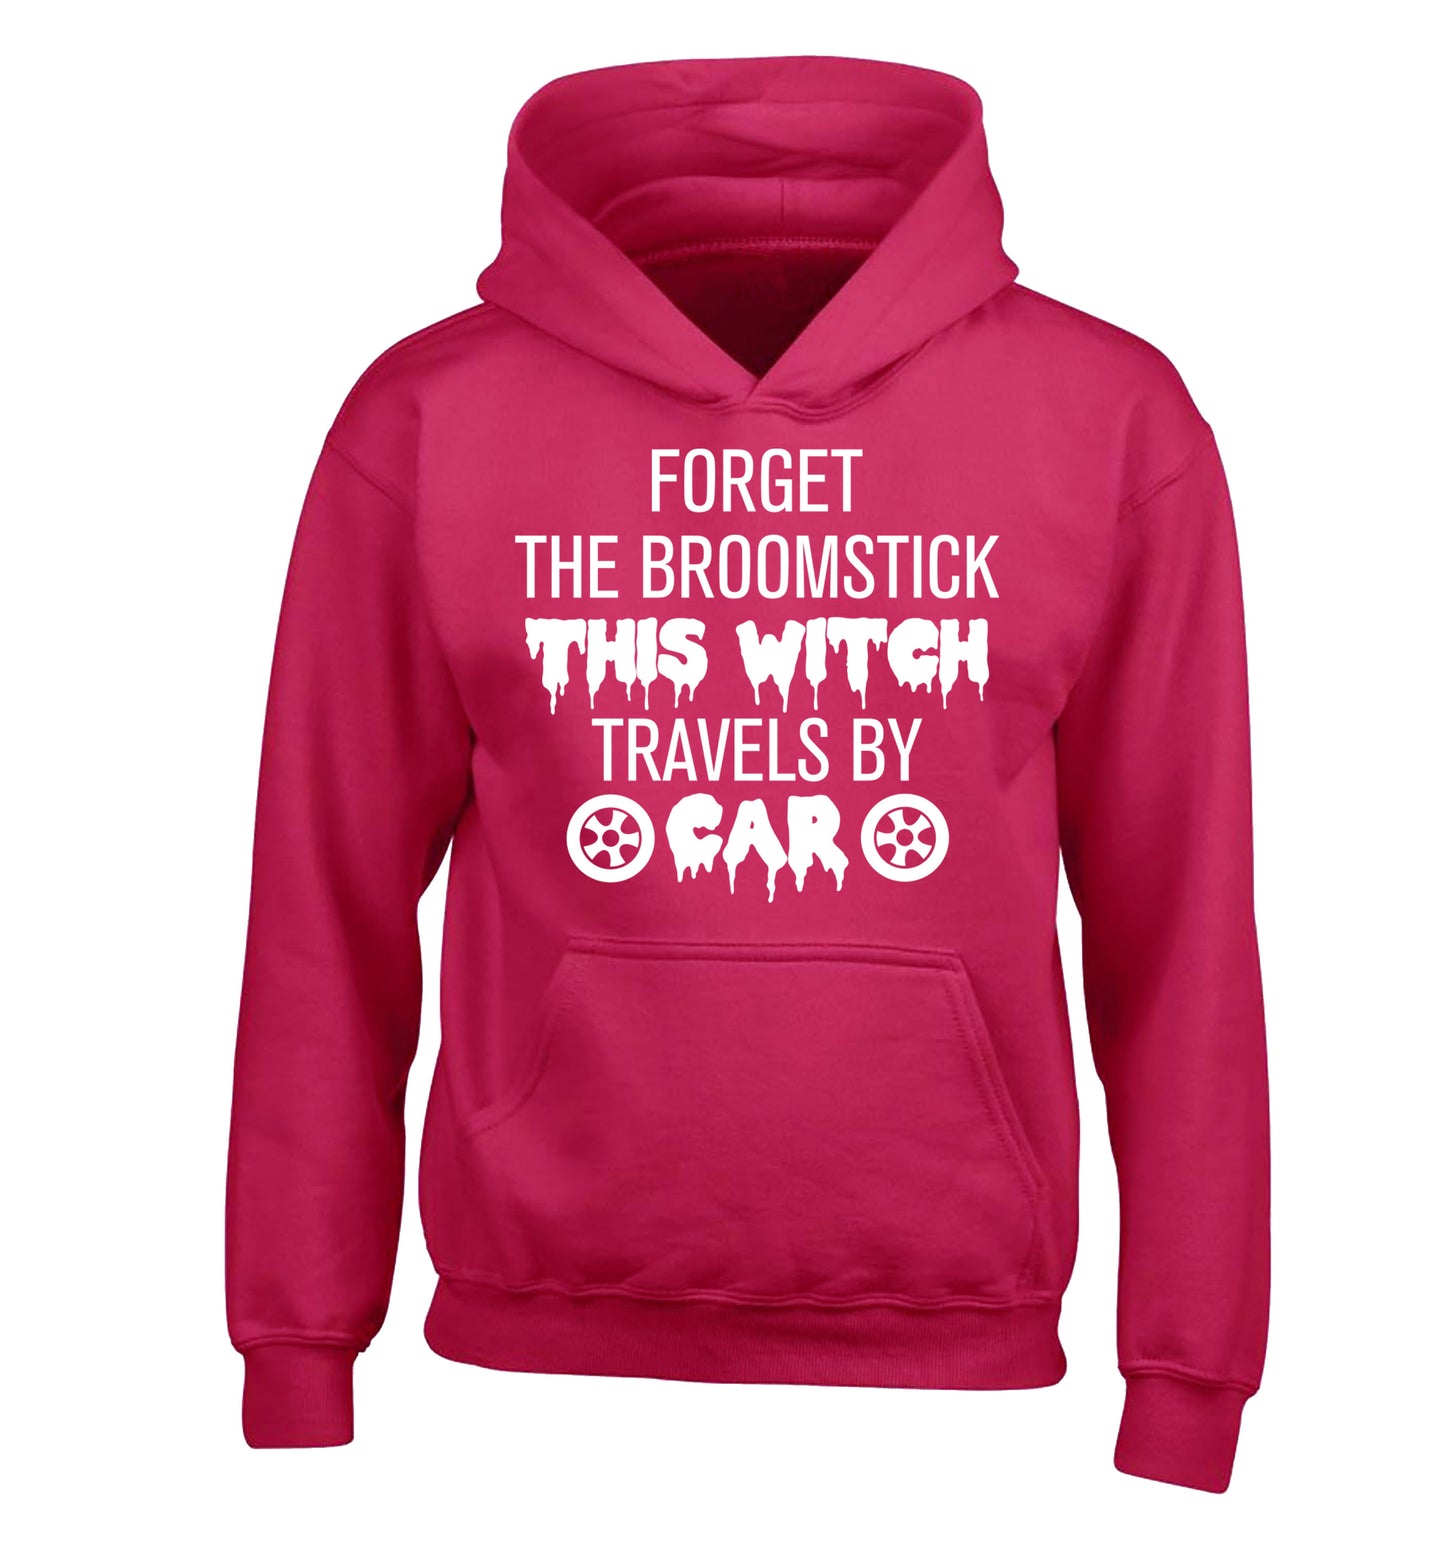 Forget the broomstick this witch travels by car children's pink hoodie 12-14 Years